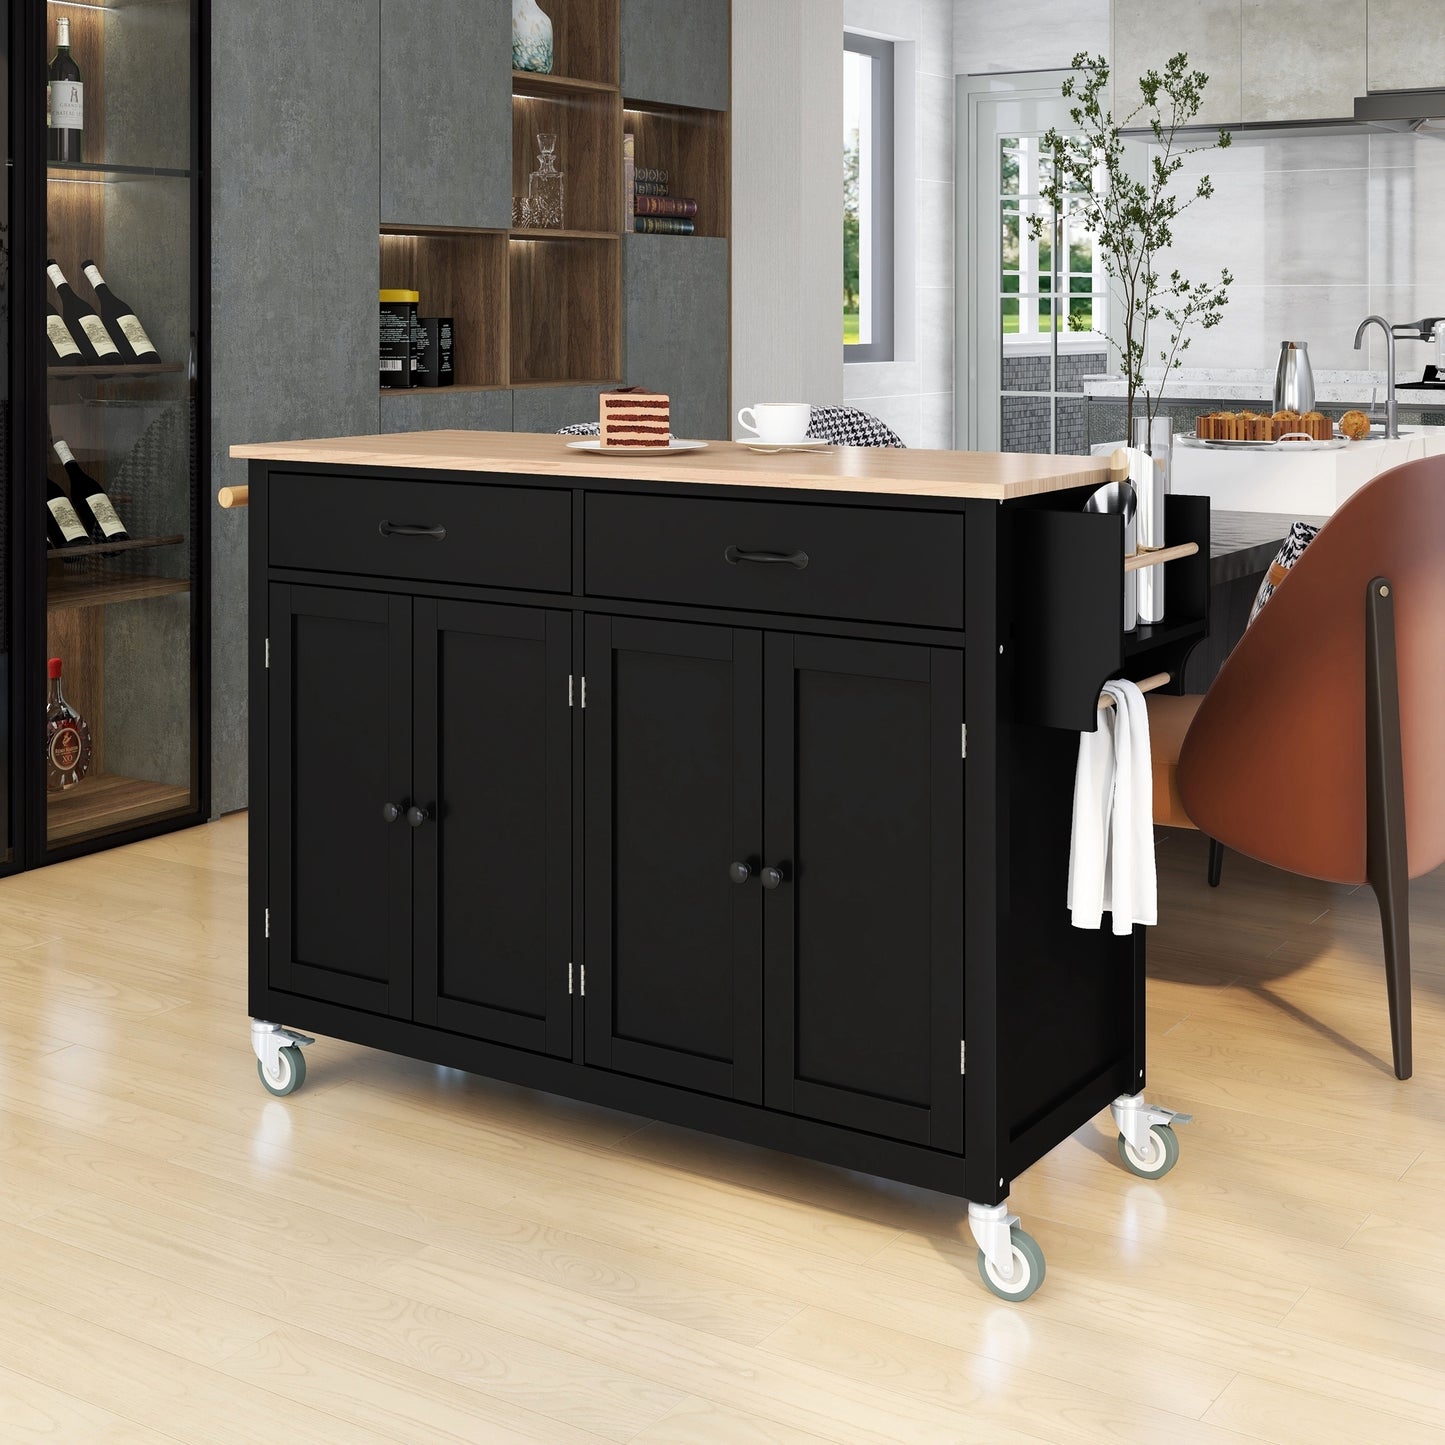 Kitchen Island Cart with Solid Wood Top and Locking Wheels,54.3 Inch Width,4 Door Cabinet and Two Drawers,Spice Rack, Towel Rack (Black)